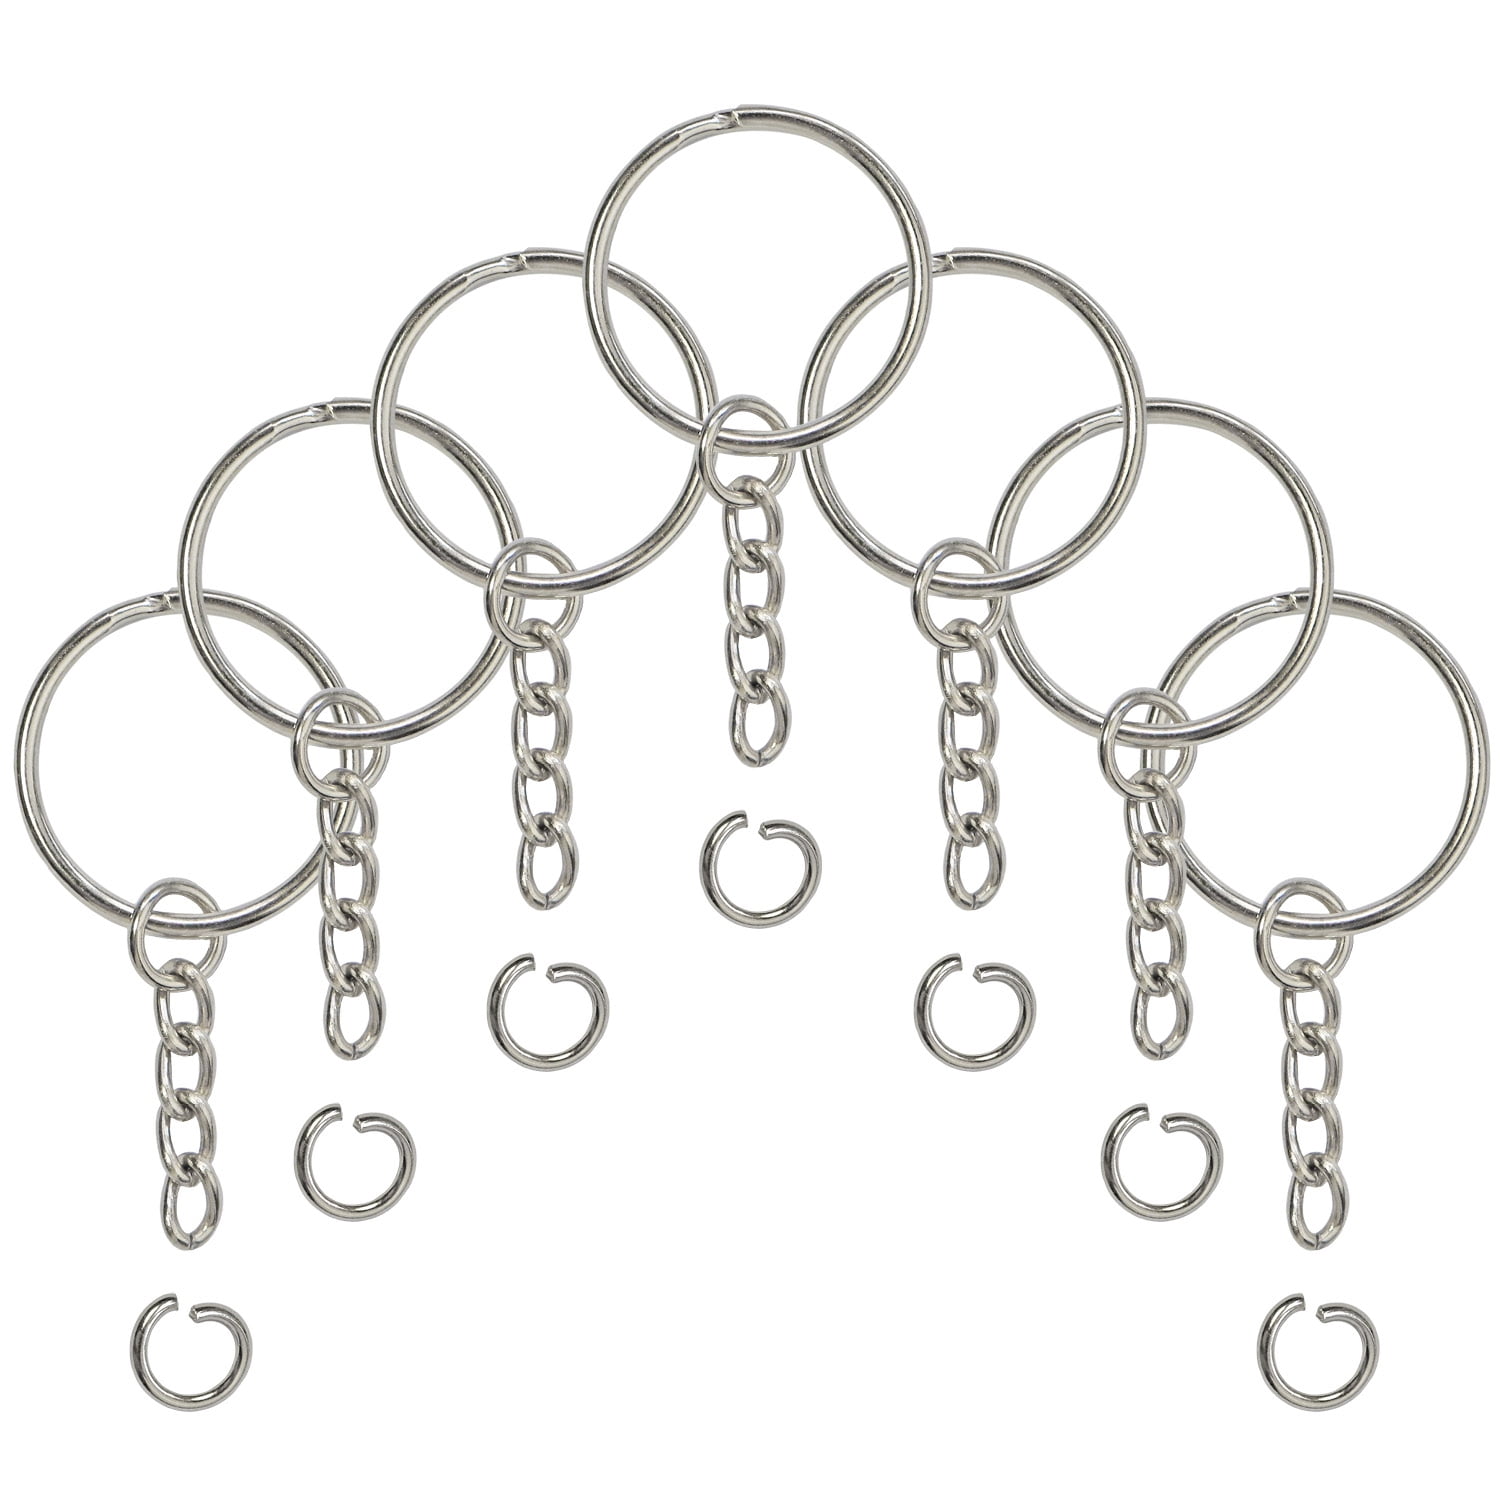 Split Key Ring with Chain and Open Jump Rings 15 PCS 1 Inch Ring 15 PCS 1.2 Inch Ring 